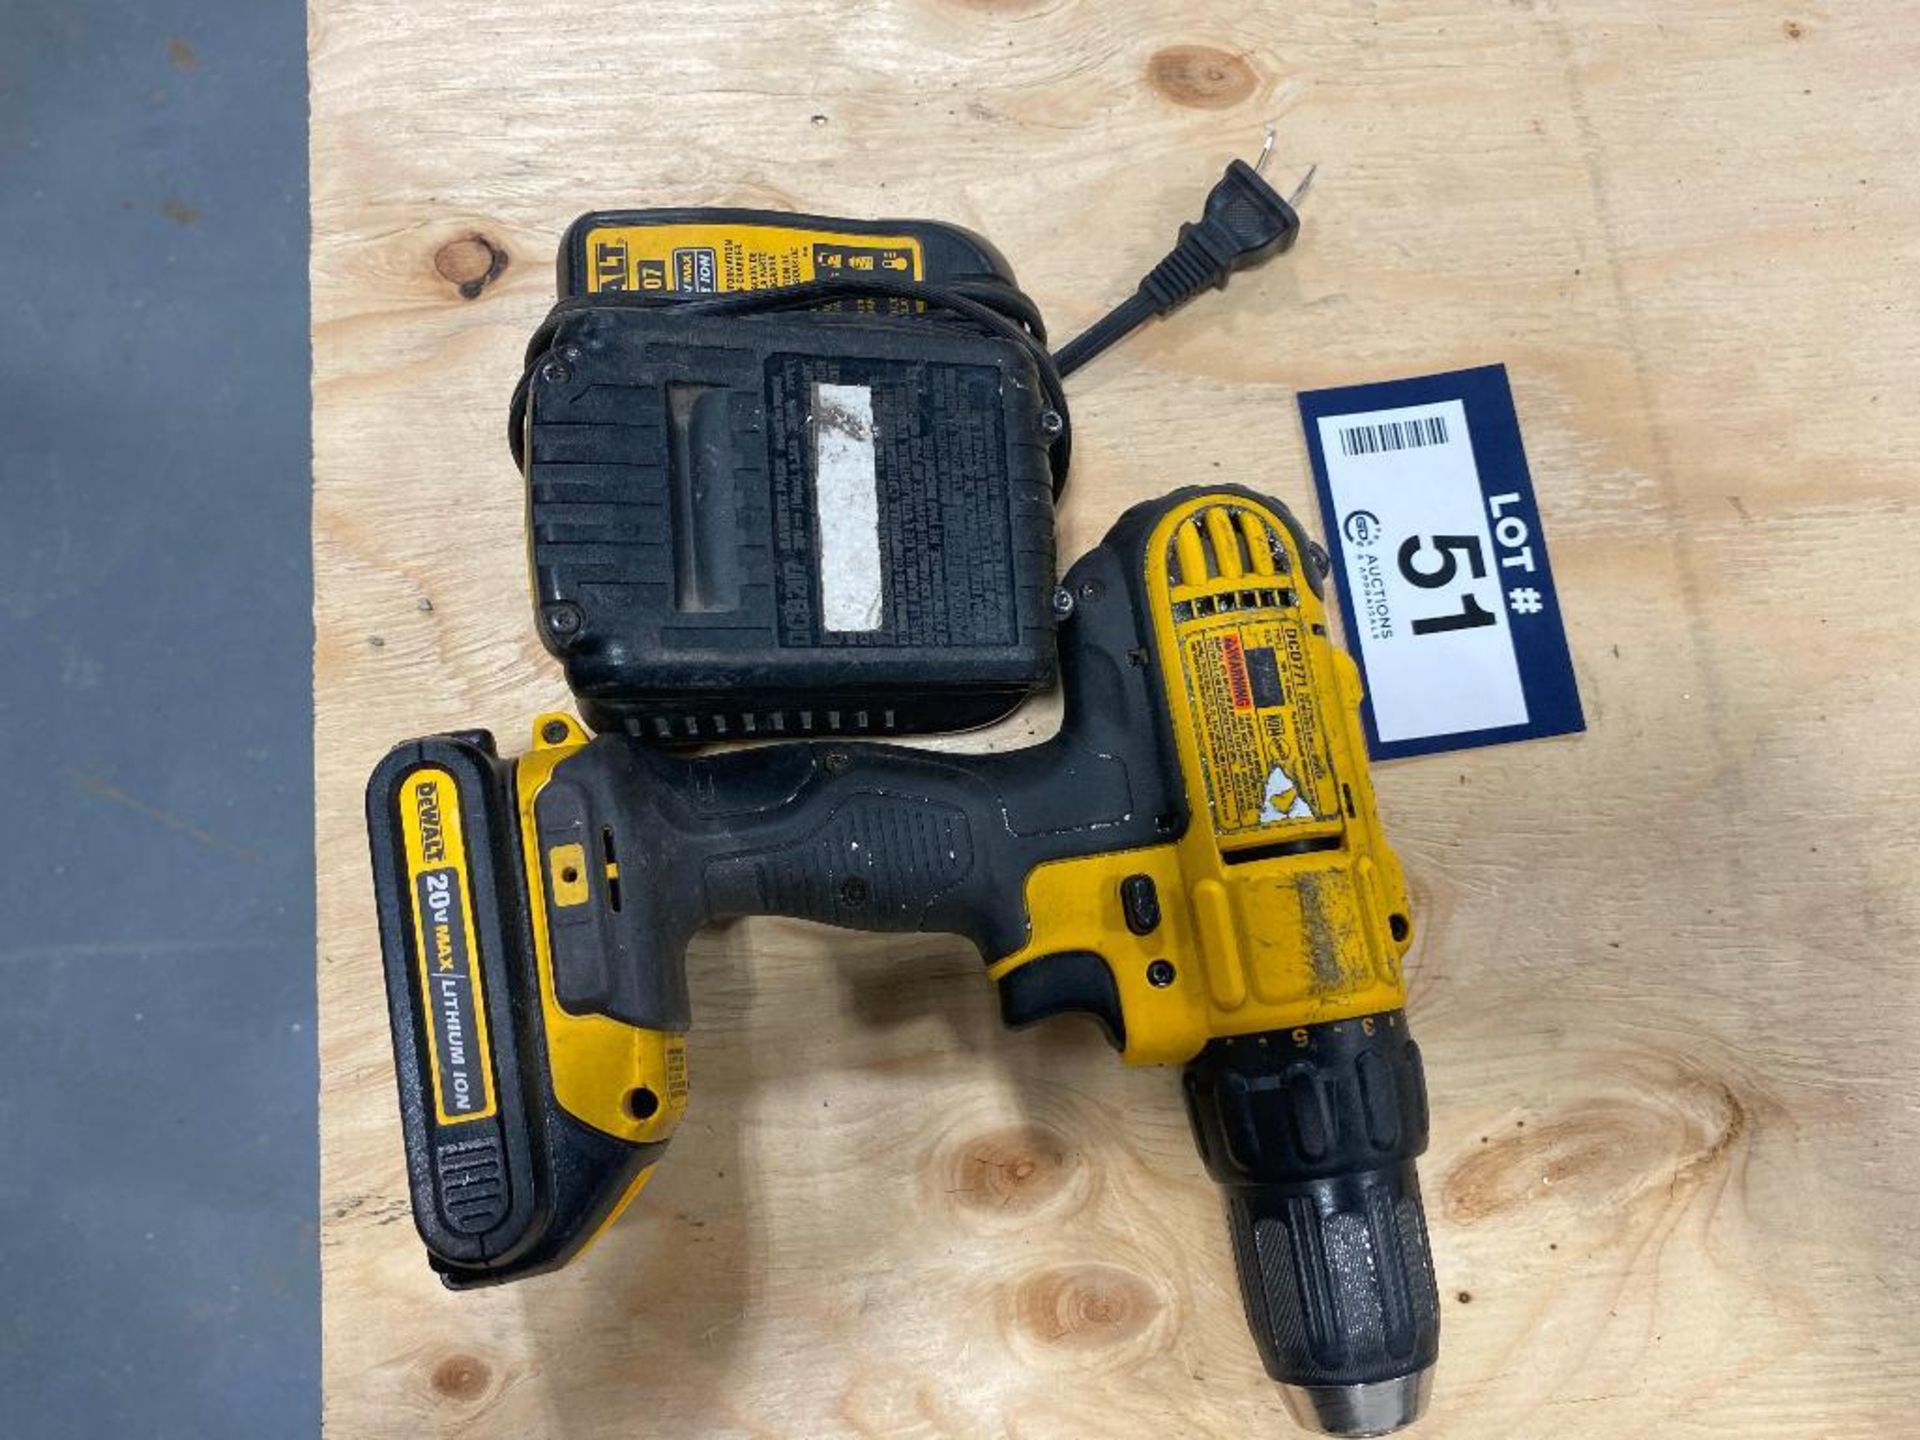 Dewalt DCD771 1/2-Inch Compact Cordless Drill/Driver - Image 4 of 4